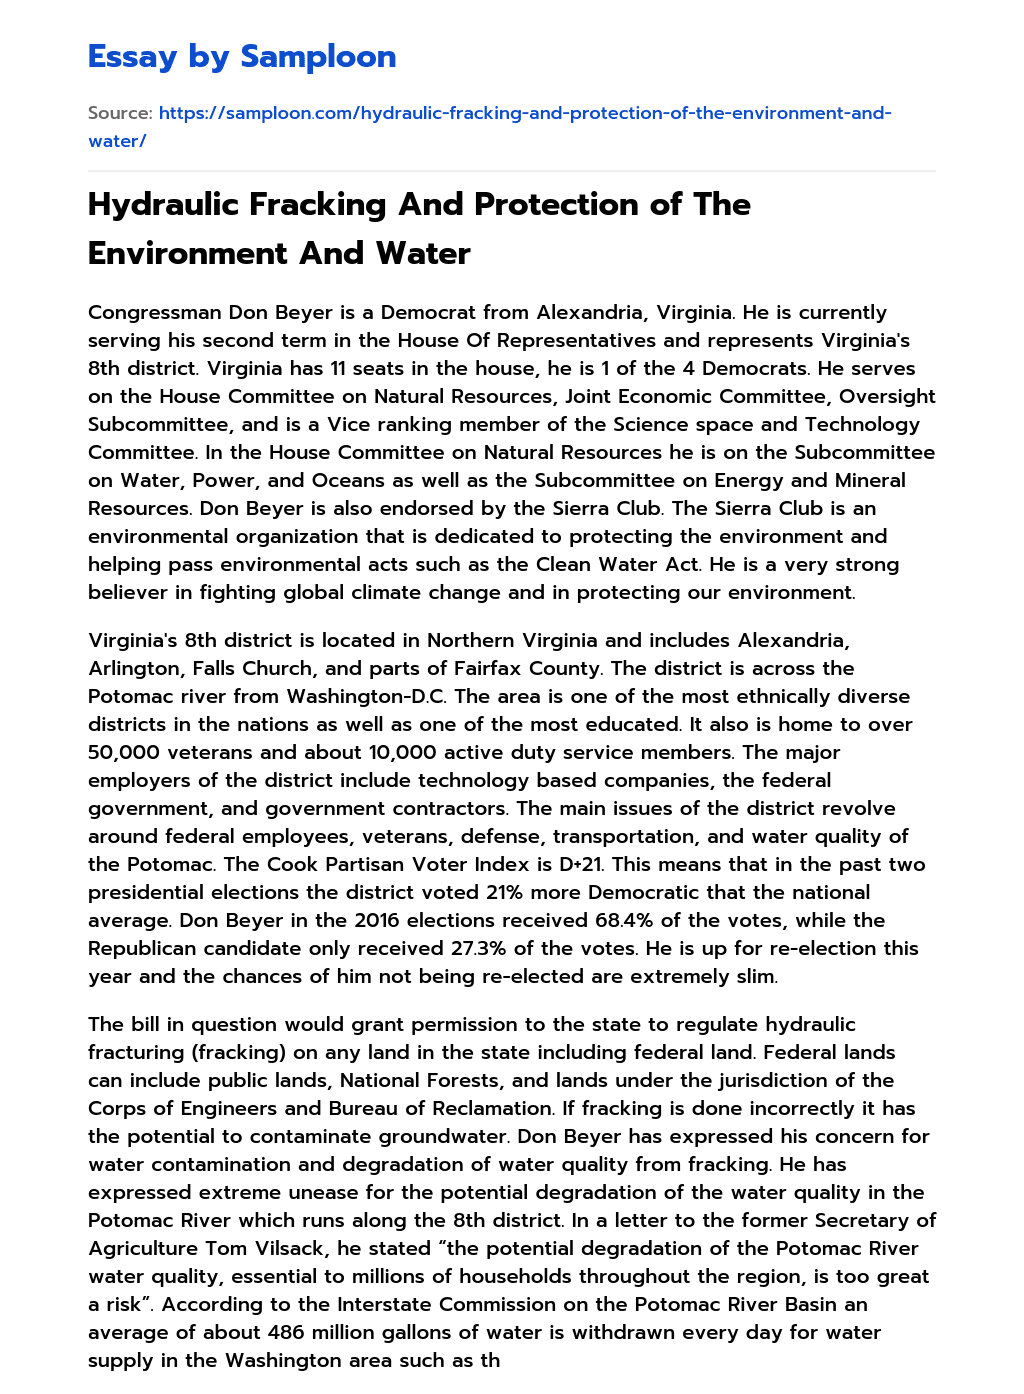 Hydraulic Fracking And Protection of The Environment And Water essay